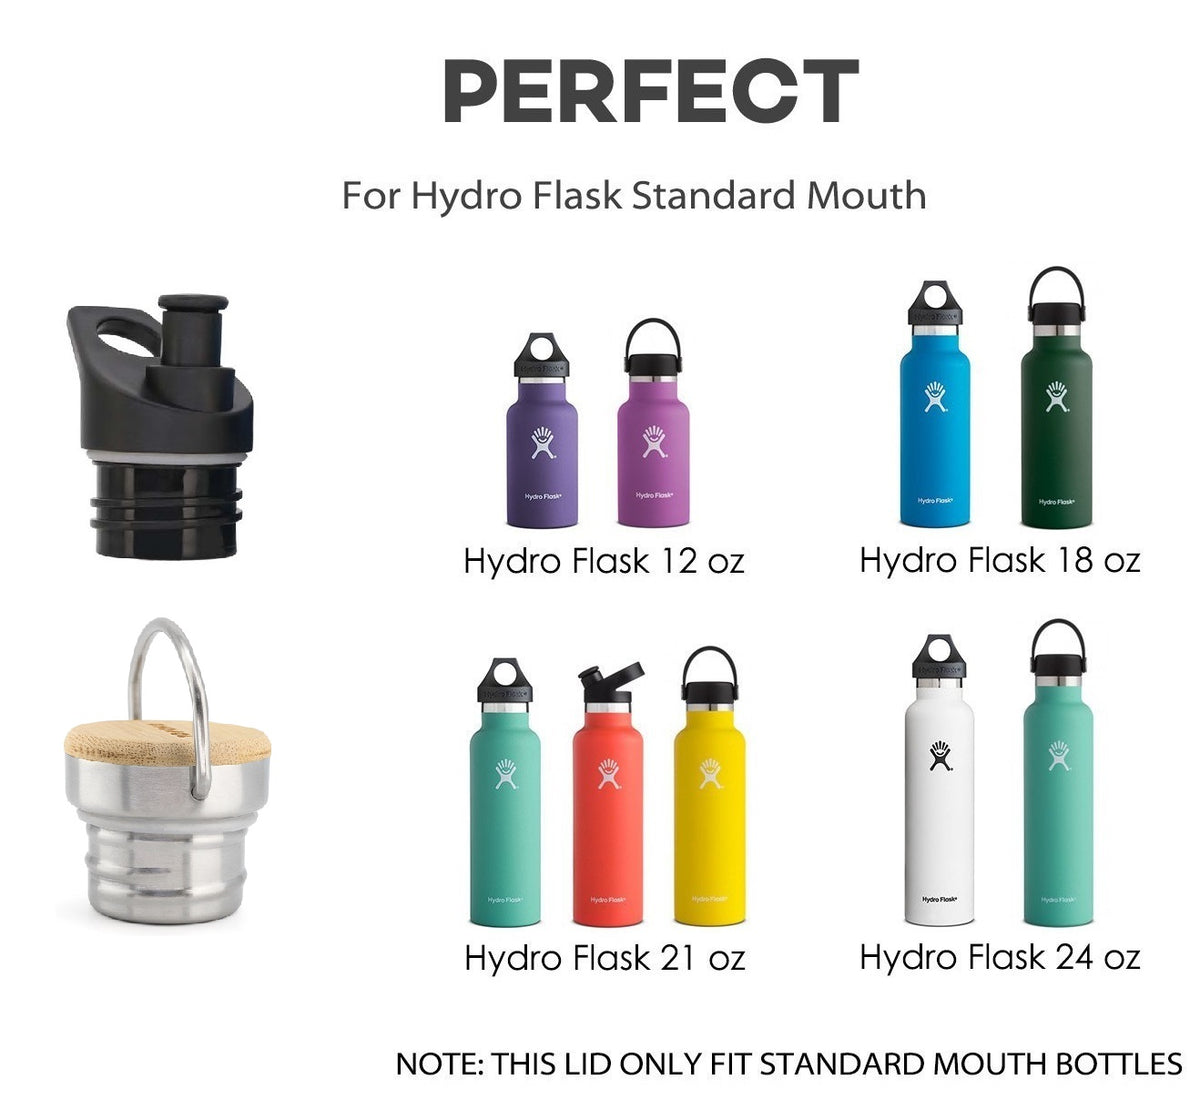 Nurich Hydro Standard Mouth Insulated Replacement Cap Accessories Compatible with Hydroflask, Klean Kanteen, Simple Modern, and Many More Top Water